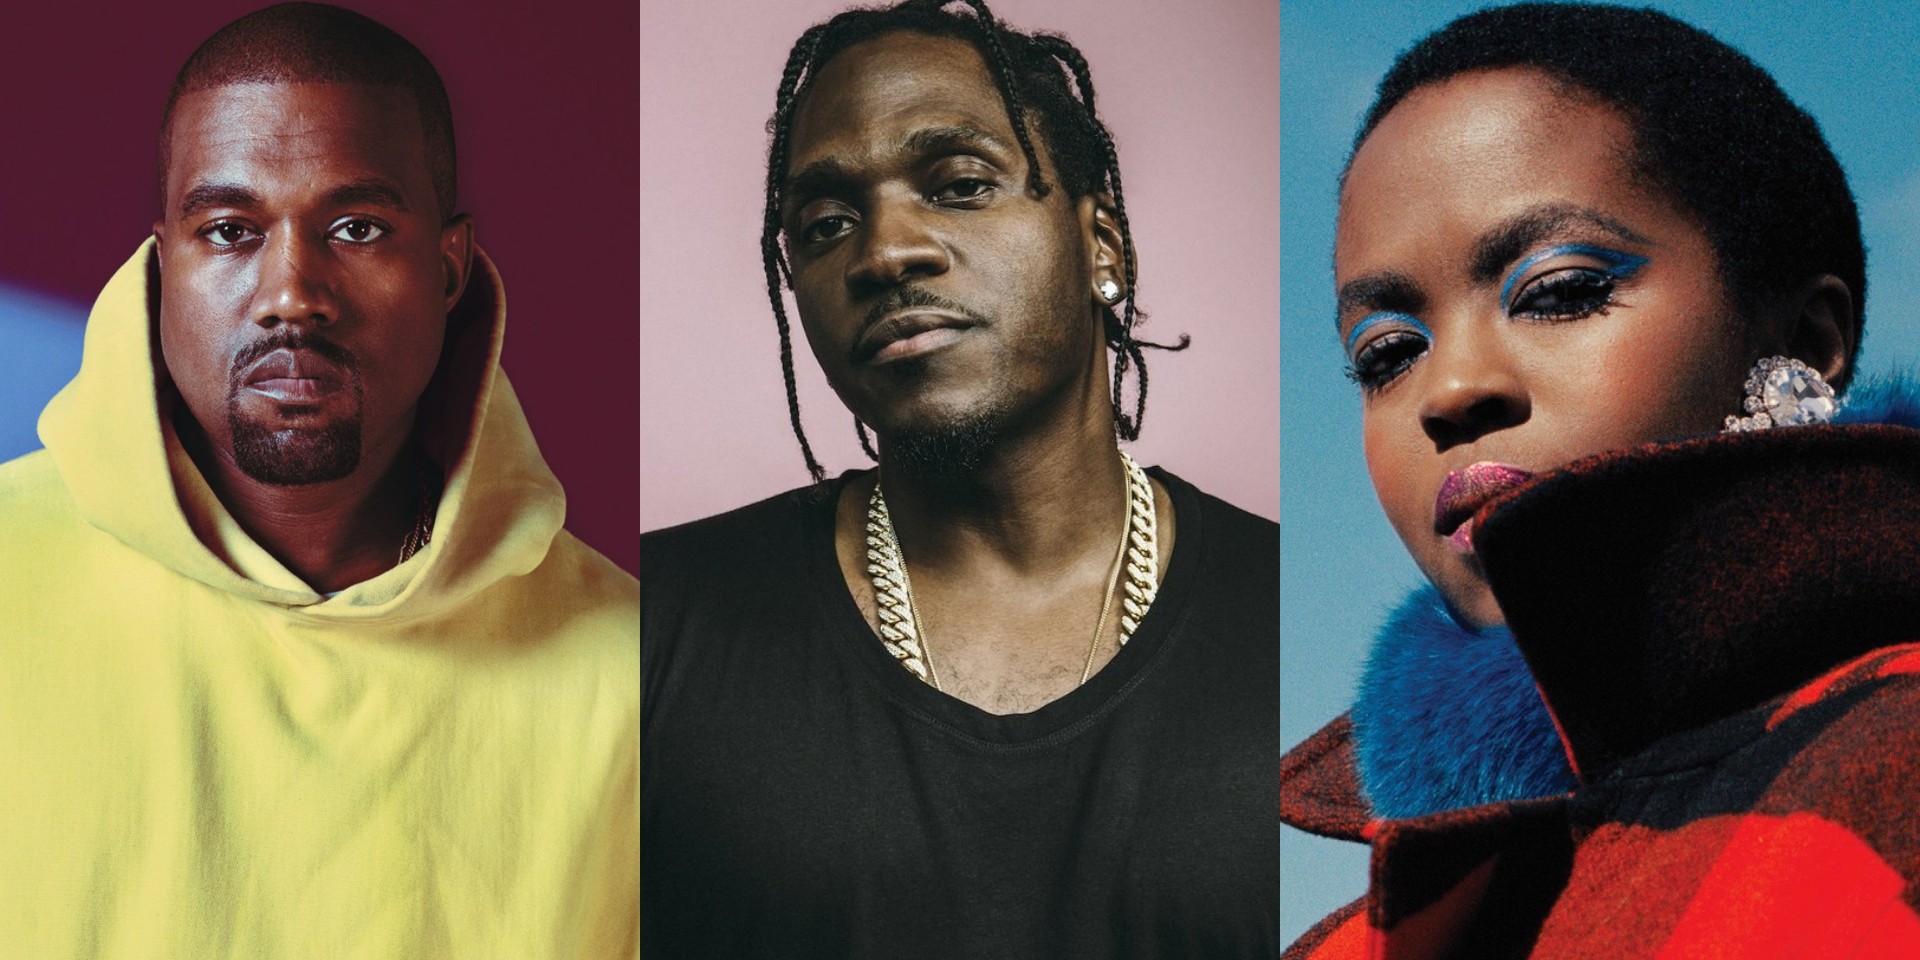 Pusha-T shares new Kanye West-produced song, 'Coming Home', featuring Lauryn Hill – listen